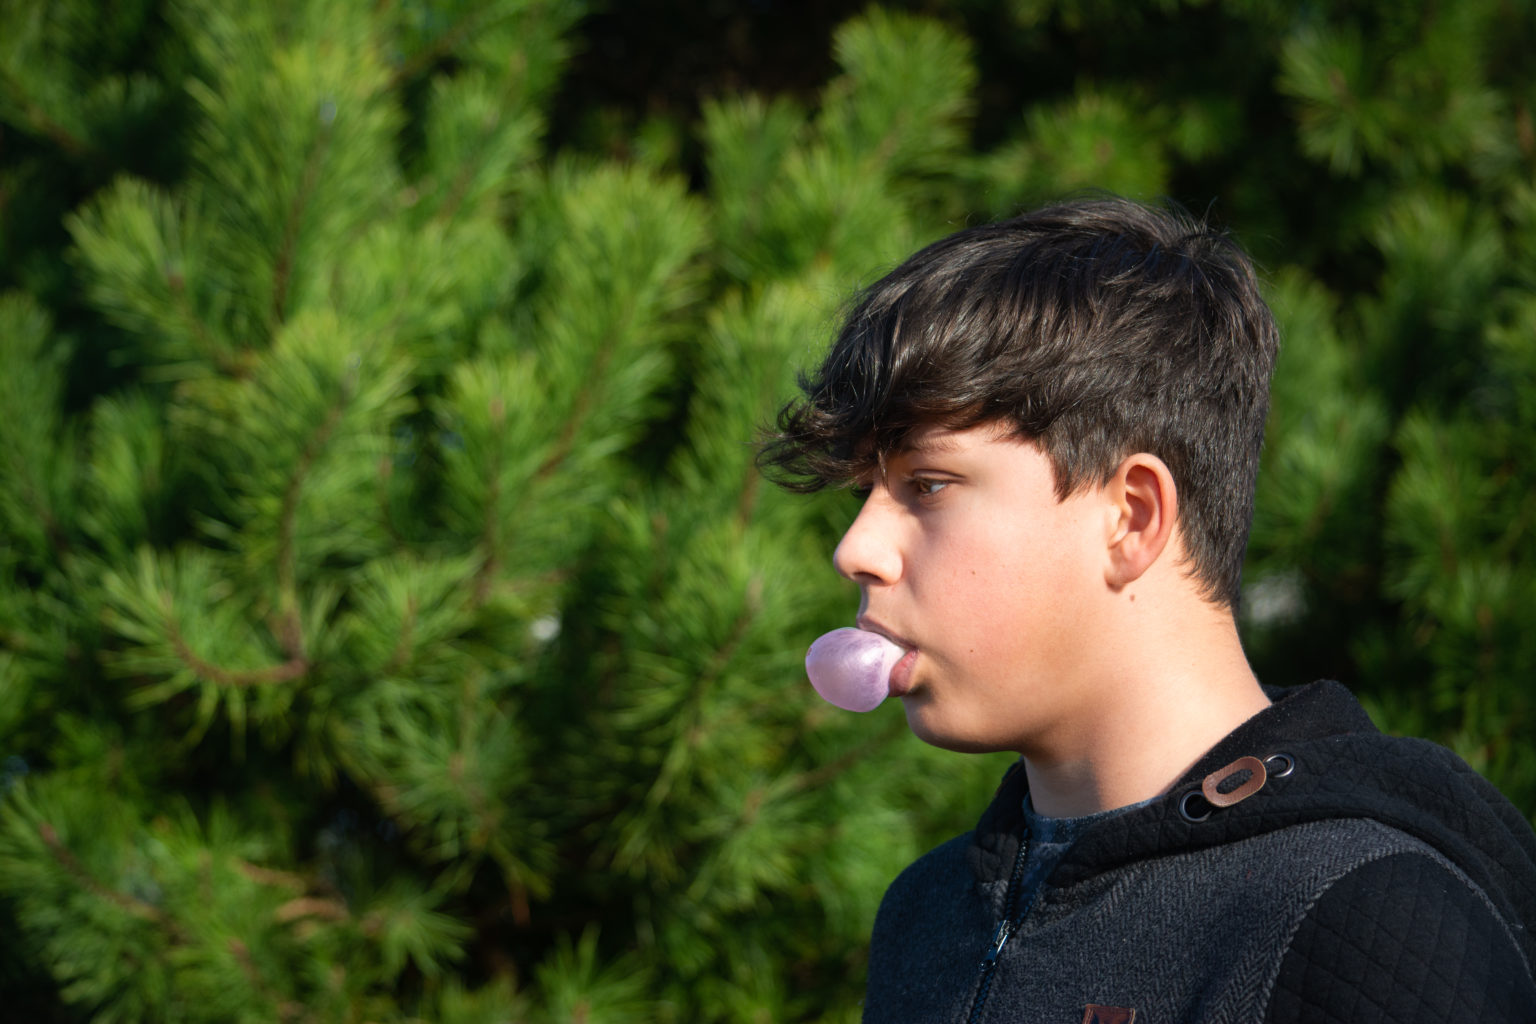 Colour image of teen boy blowing a bubblegum bubble with a backdrop of evergreen trees on a sunny day